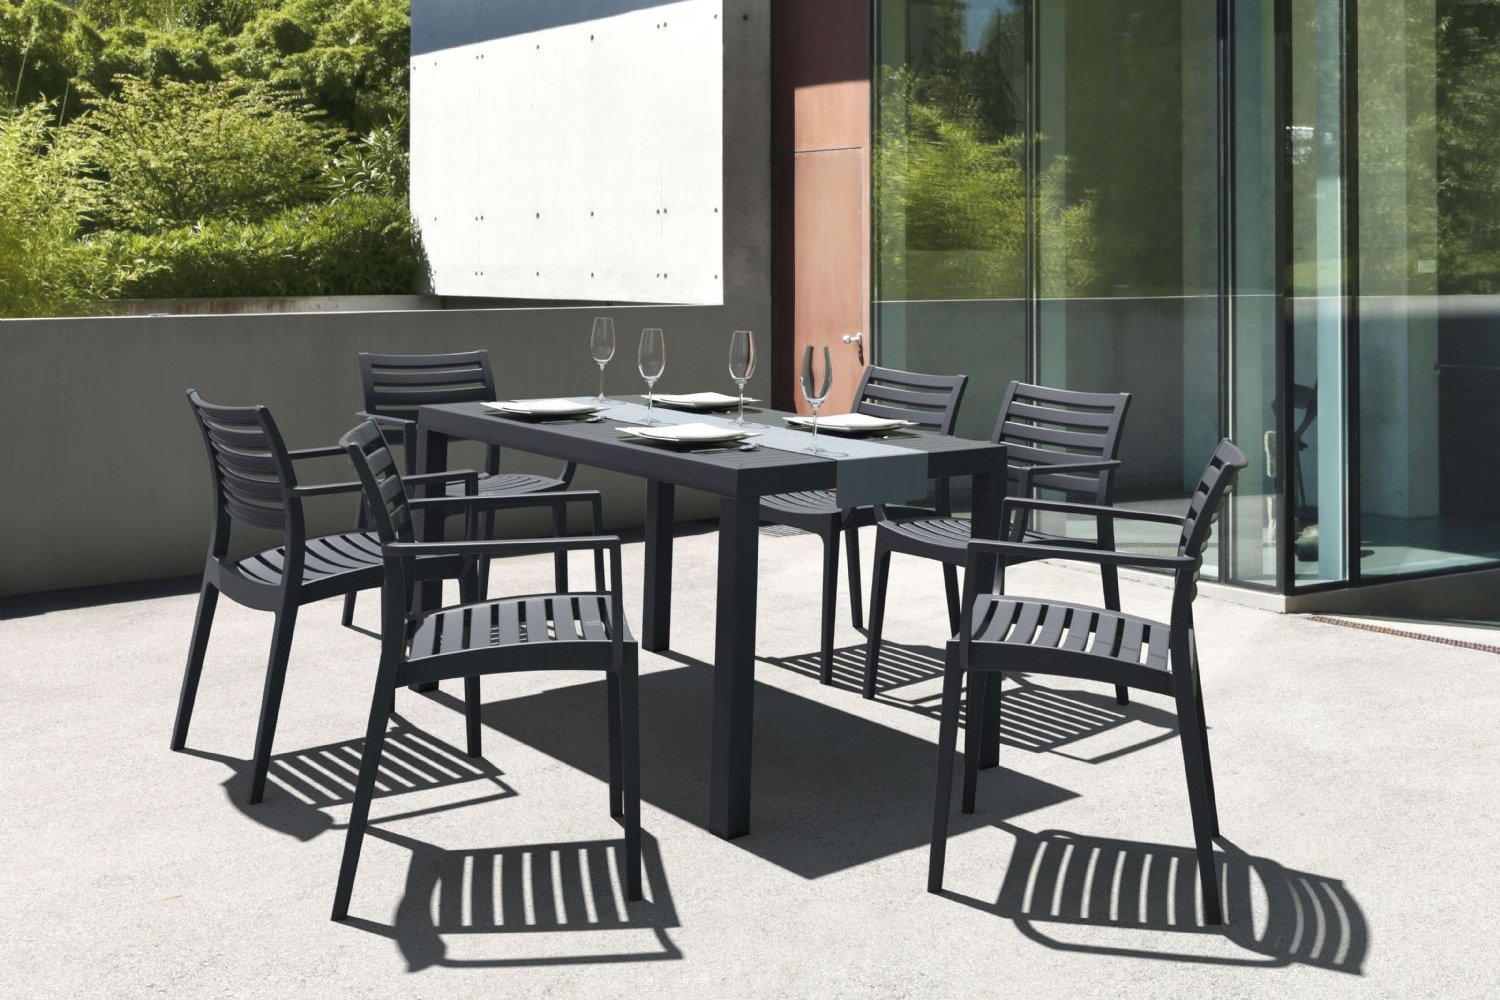 Artemis Resin Rectangle Outdoor Dining Set 7 Piece with Arm Chairs Black ISP1862S-BLA - 5